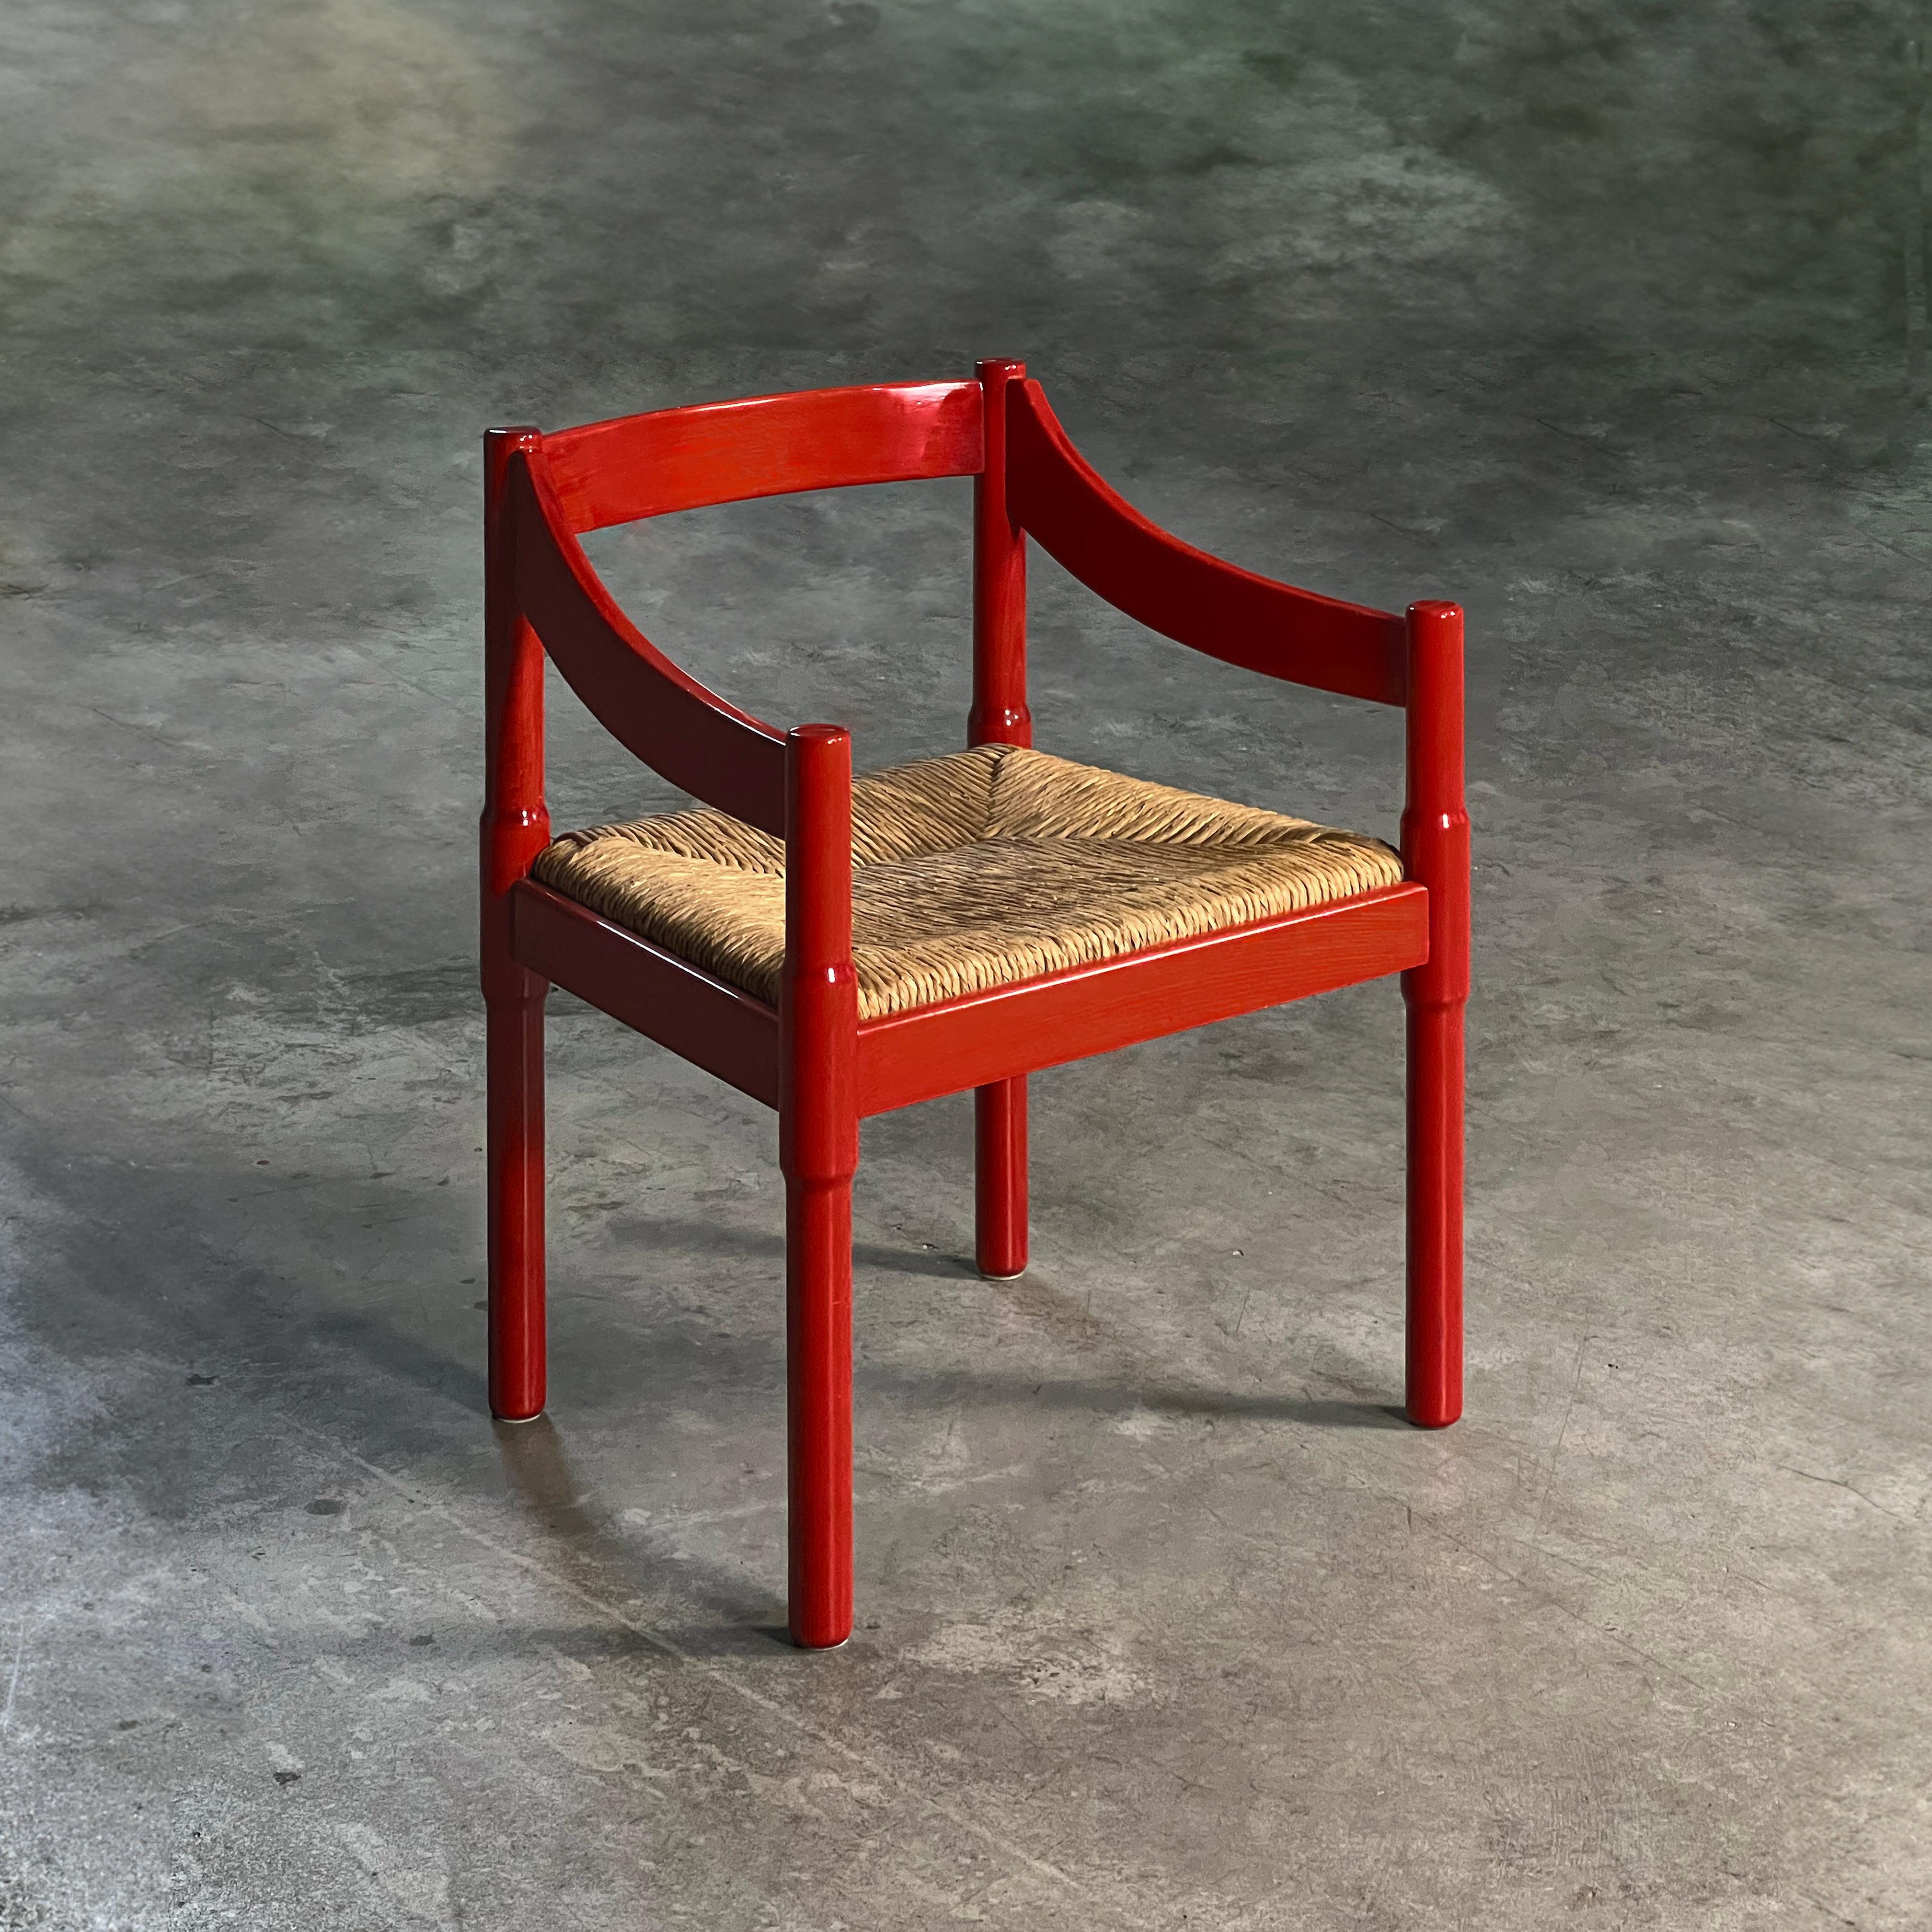 Red Carimate Chair by Vico Magistretti, Italy 1960s

Behold the captivating Carimate chair, a masterpiece carved from rich, red-stained solid beech and brought to life by the visionary architect and designer, Vico Magistretti.

The rush seat, a